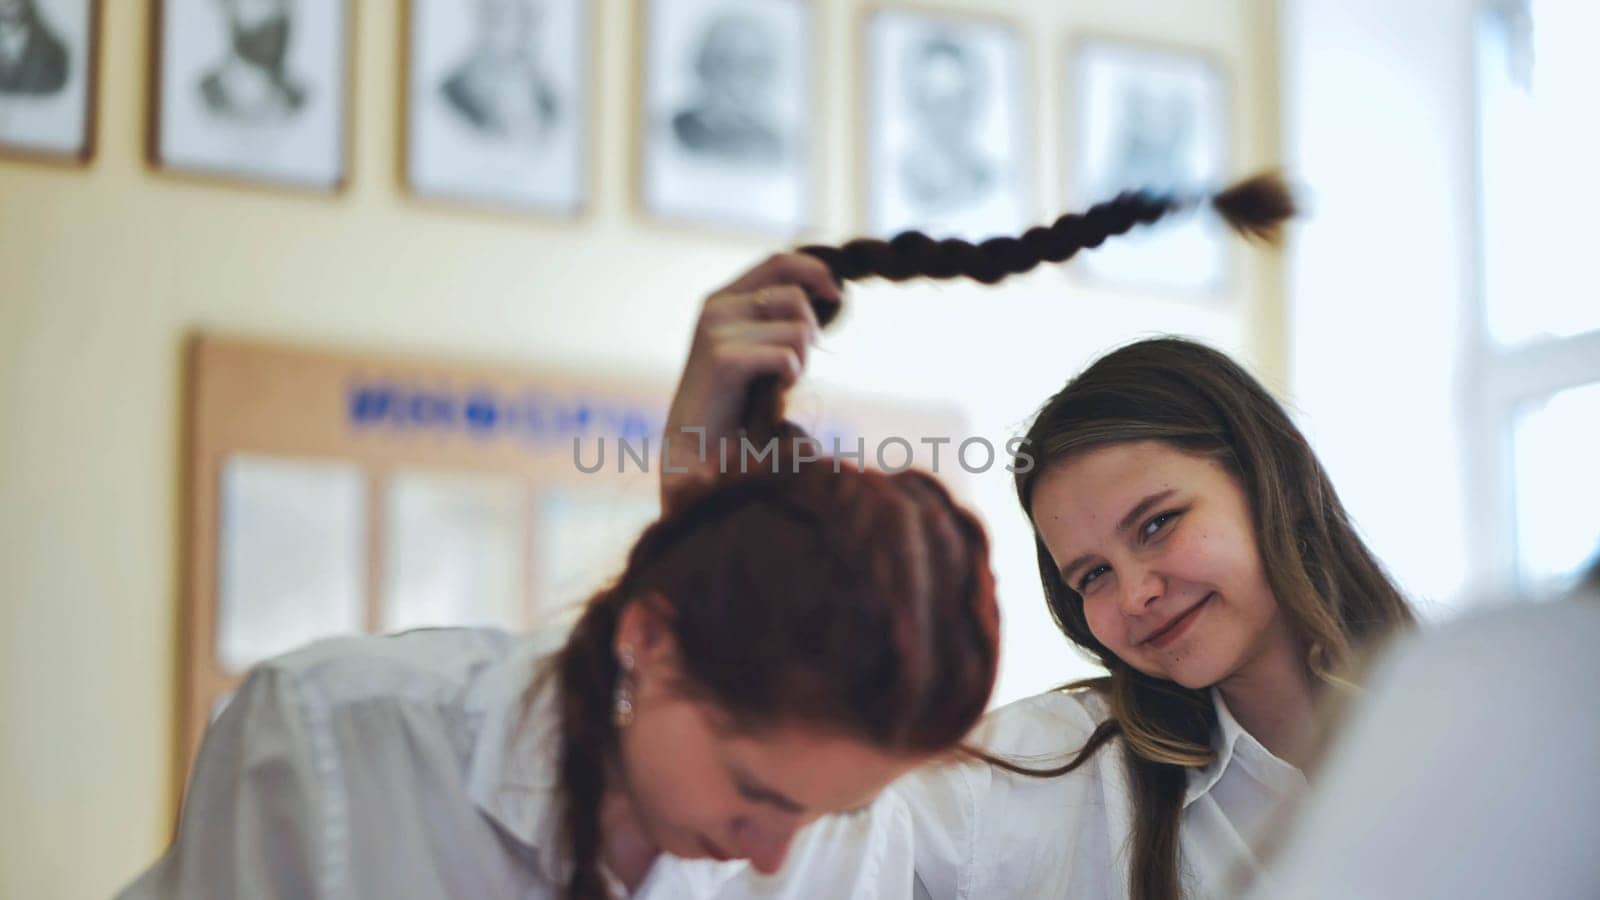 Fun schoolgirls in the classroom. Girl playing with her friend's pigtail. by DovidPro